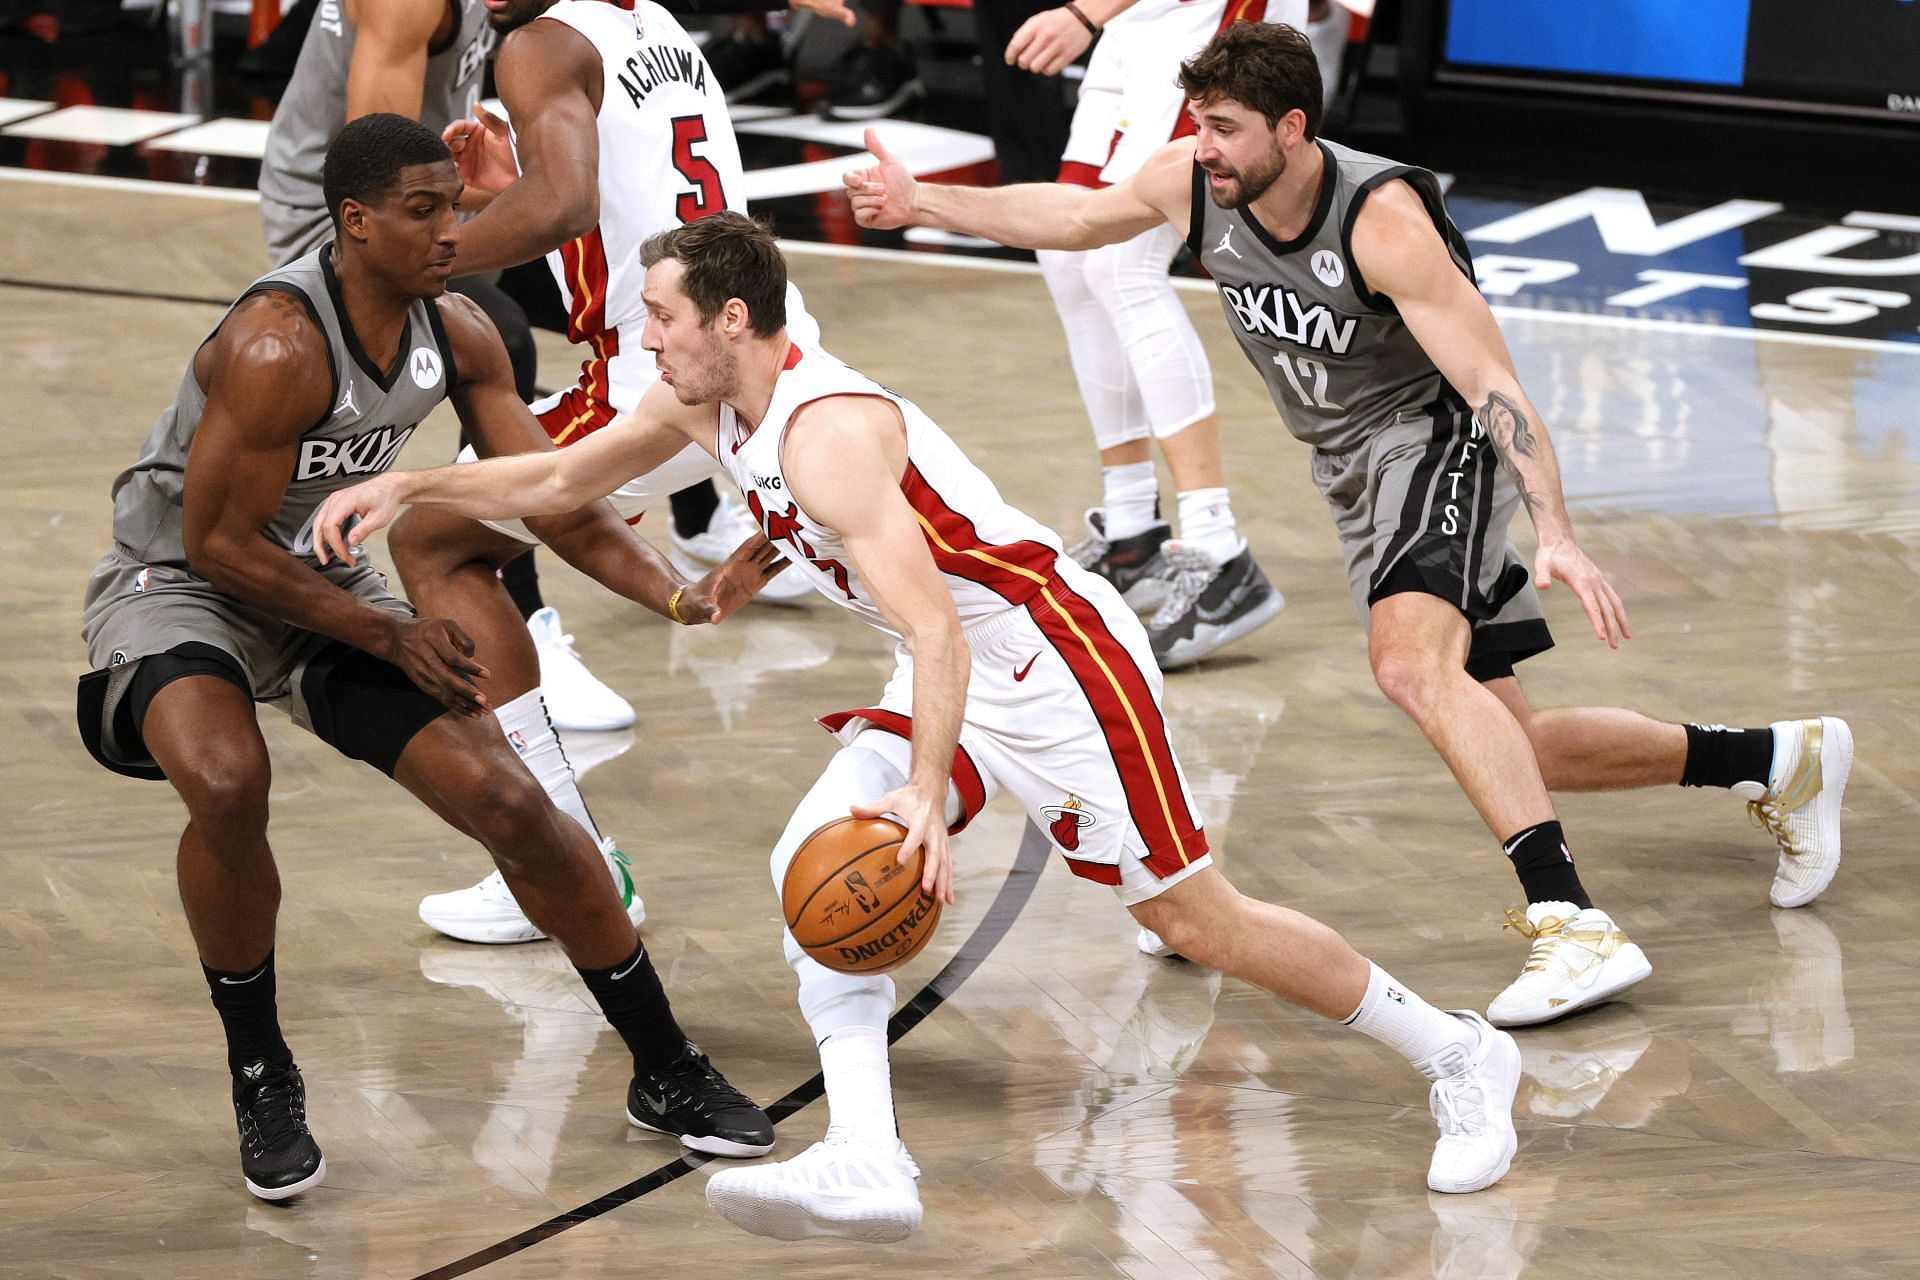 Goran Dragic of the Miami Heat dribbles against Reggie Perry and Joe Harris (12) of the Brooklyn Nets during the second half at Barclays Center on Jan. 25, 2021, in New York City. The Nets won 98-85.